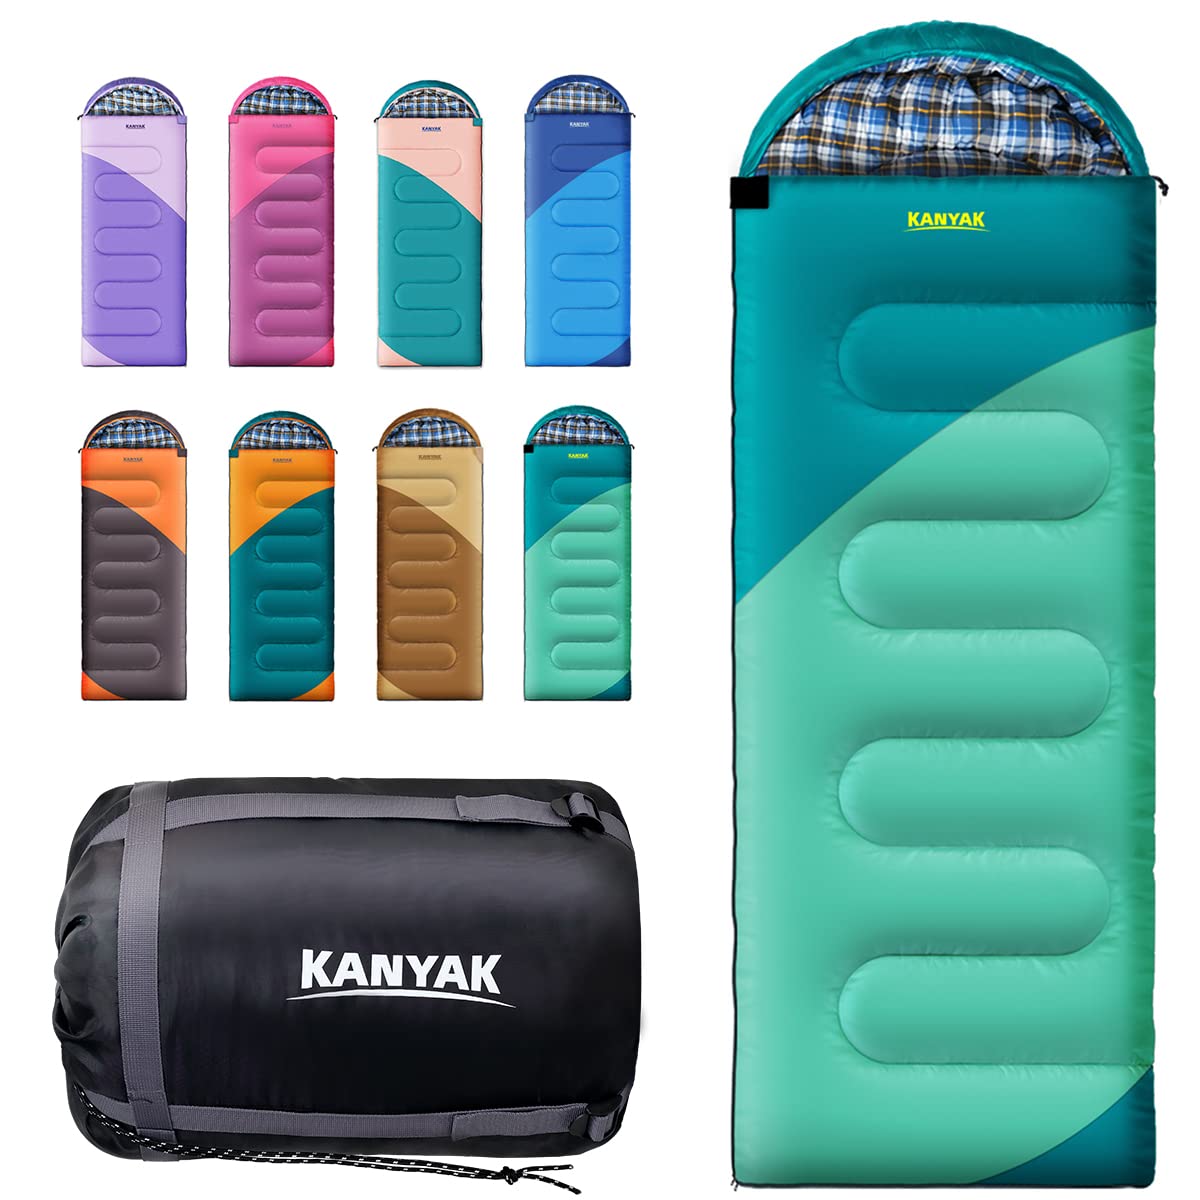 KANYAK Warm & cool Weather Single Sleeping Bag for Adults Kids, Ideal for Hiking, camping & Outdoor Adventures, great gi